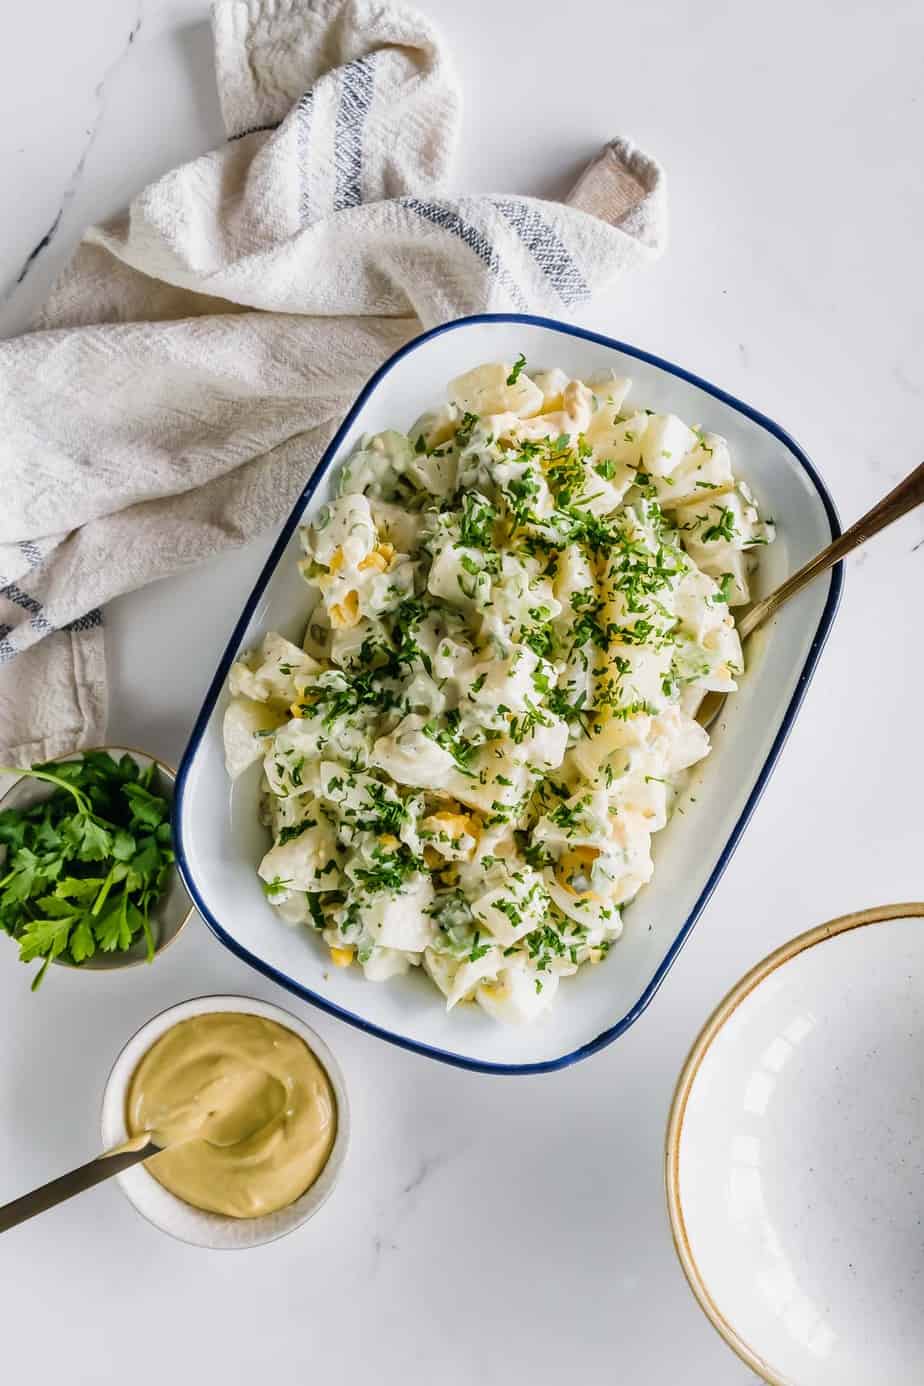 A side of potato salad with fresh herbs and mustard.